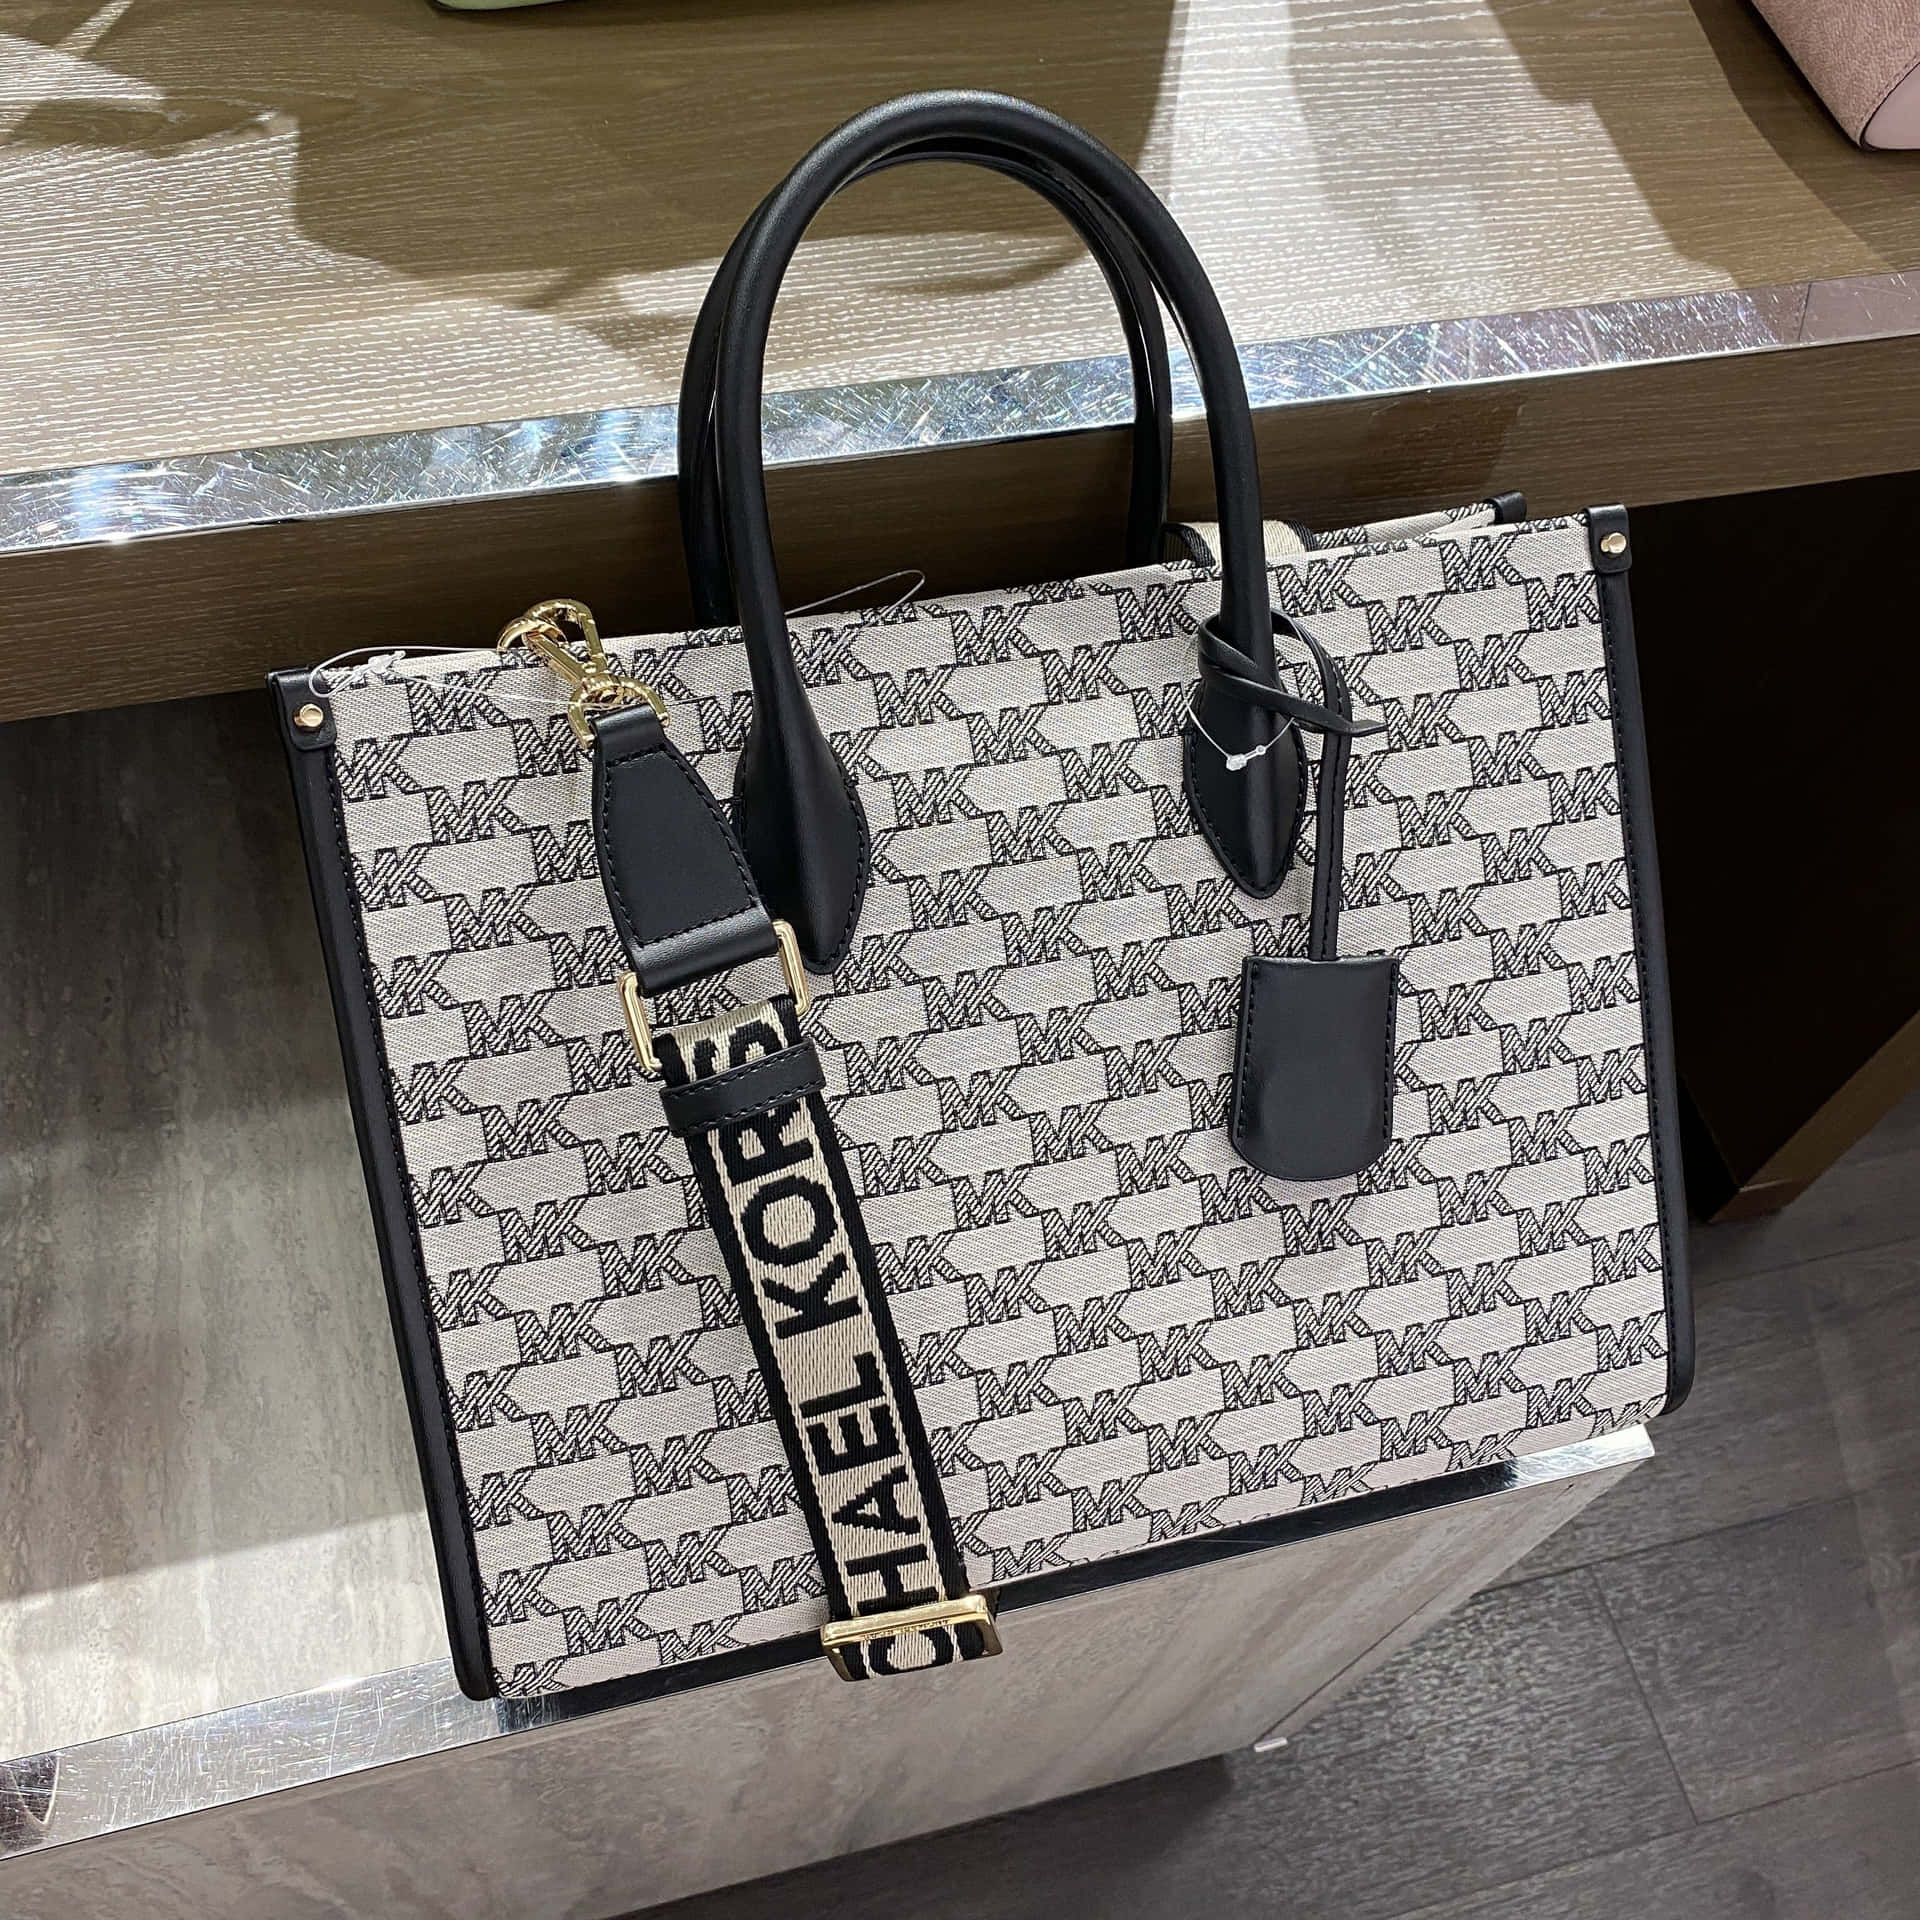 Add Refinement and Luxury to Your Look with Michael Kors